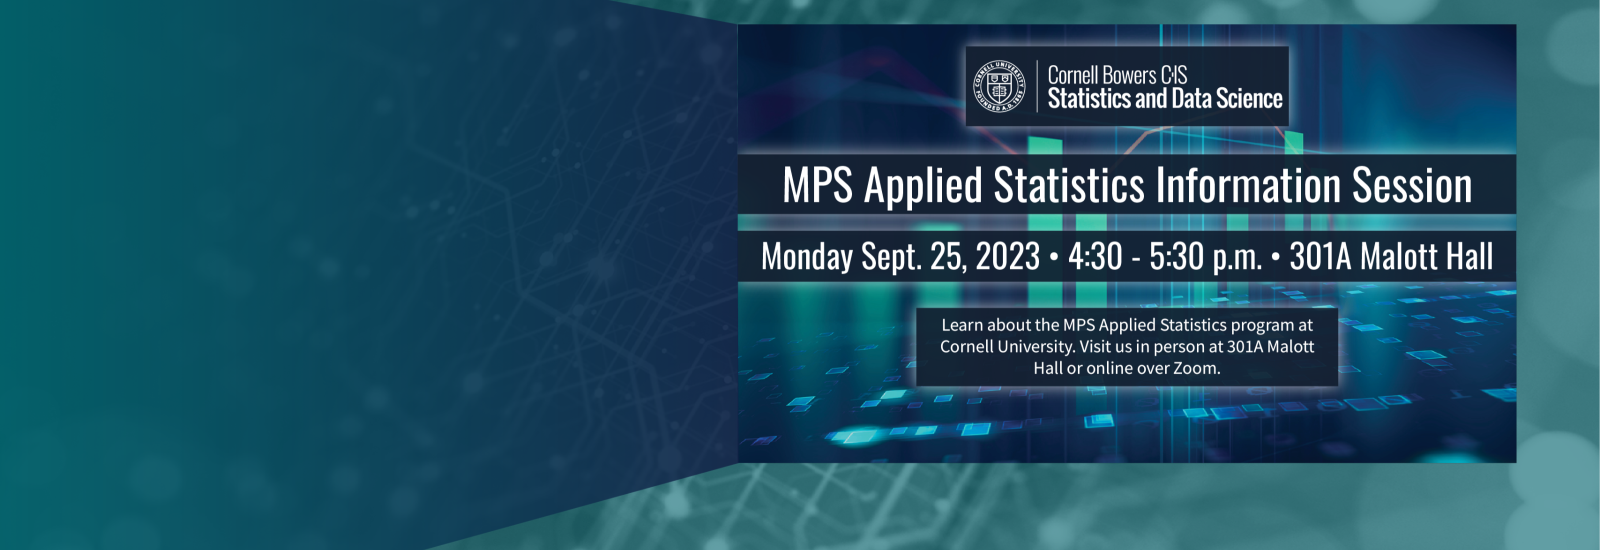 A graphic promoting the MPS Applied Statistics Info Session